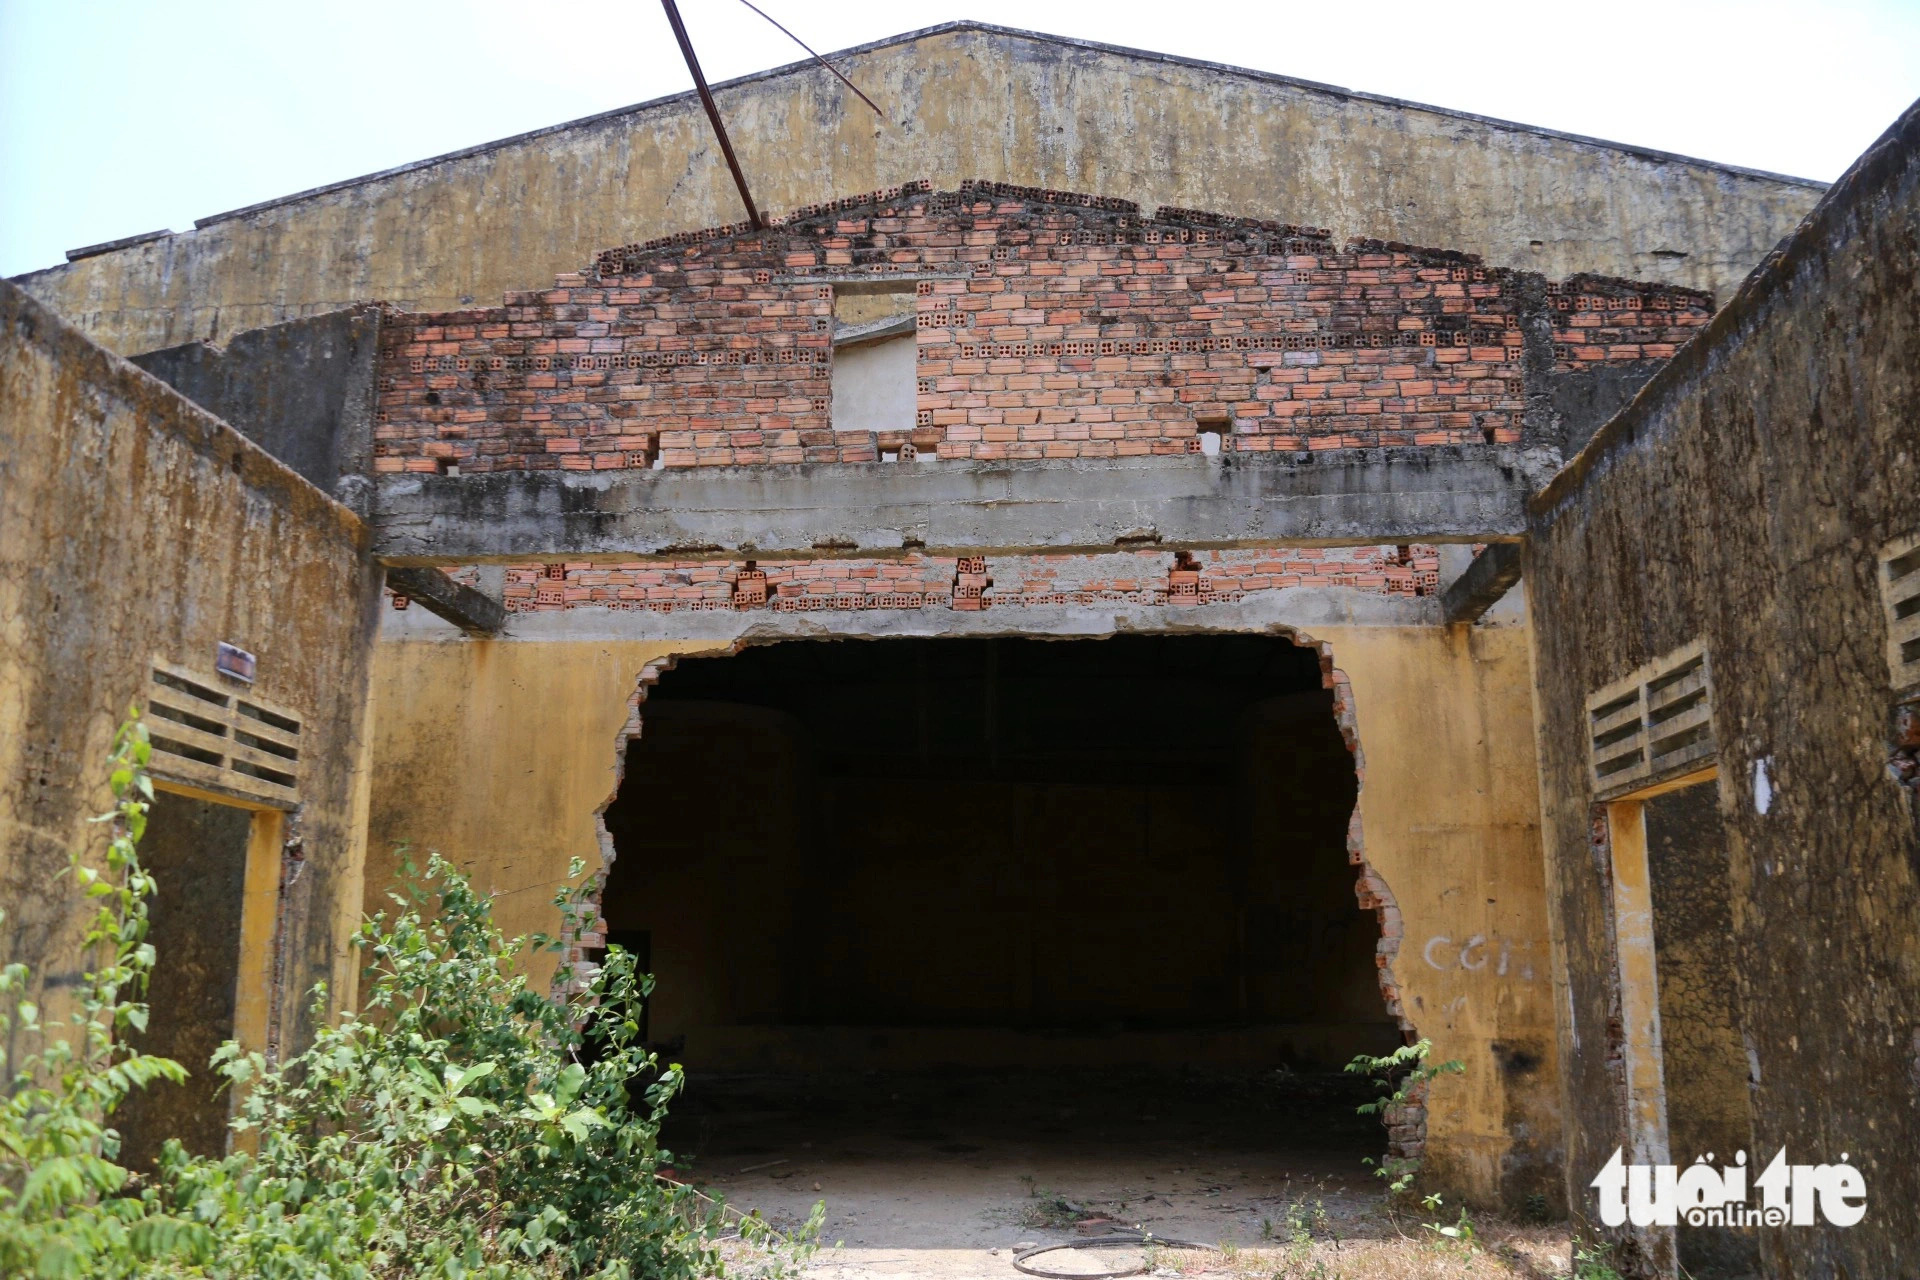 The abandoned vocational training center’s many blocks and meeting hall were left to rot. Photo: Doan Nhan / Tuoi Tre